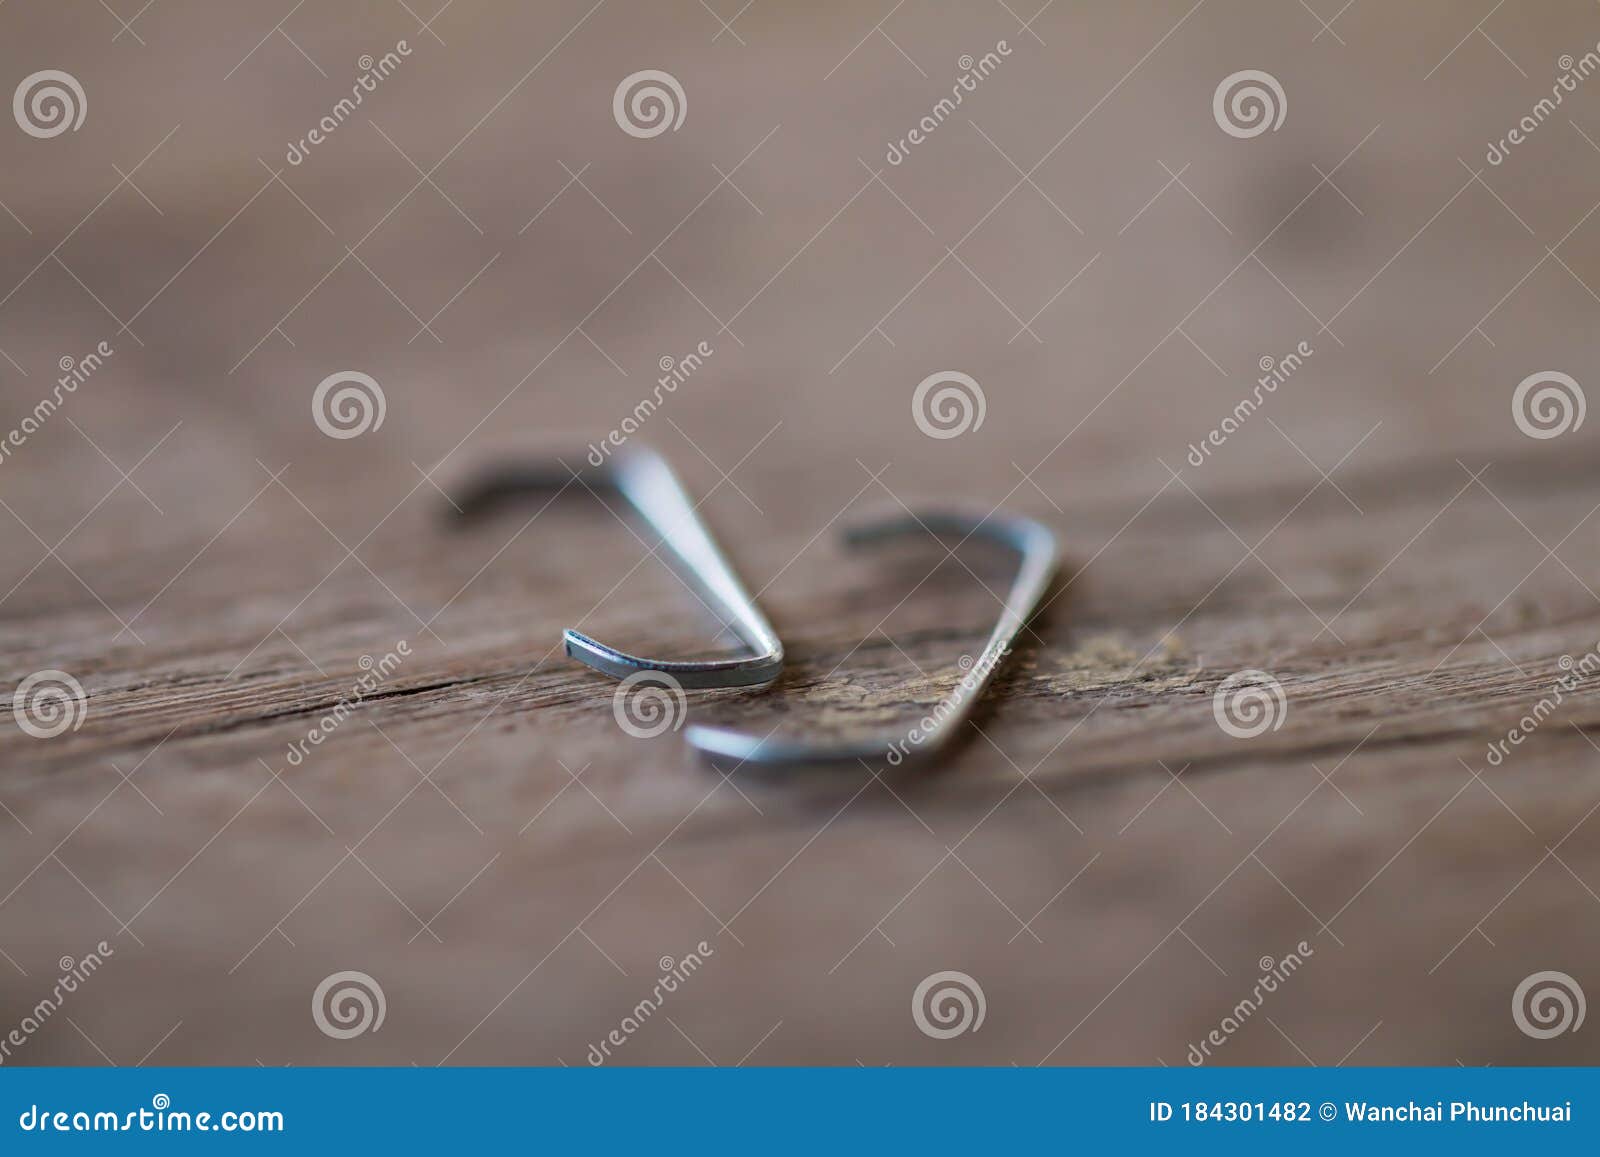 The Two Staples that Have Been Bent are Placed on a Brown Wooden Floor ...